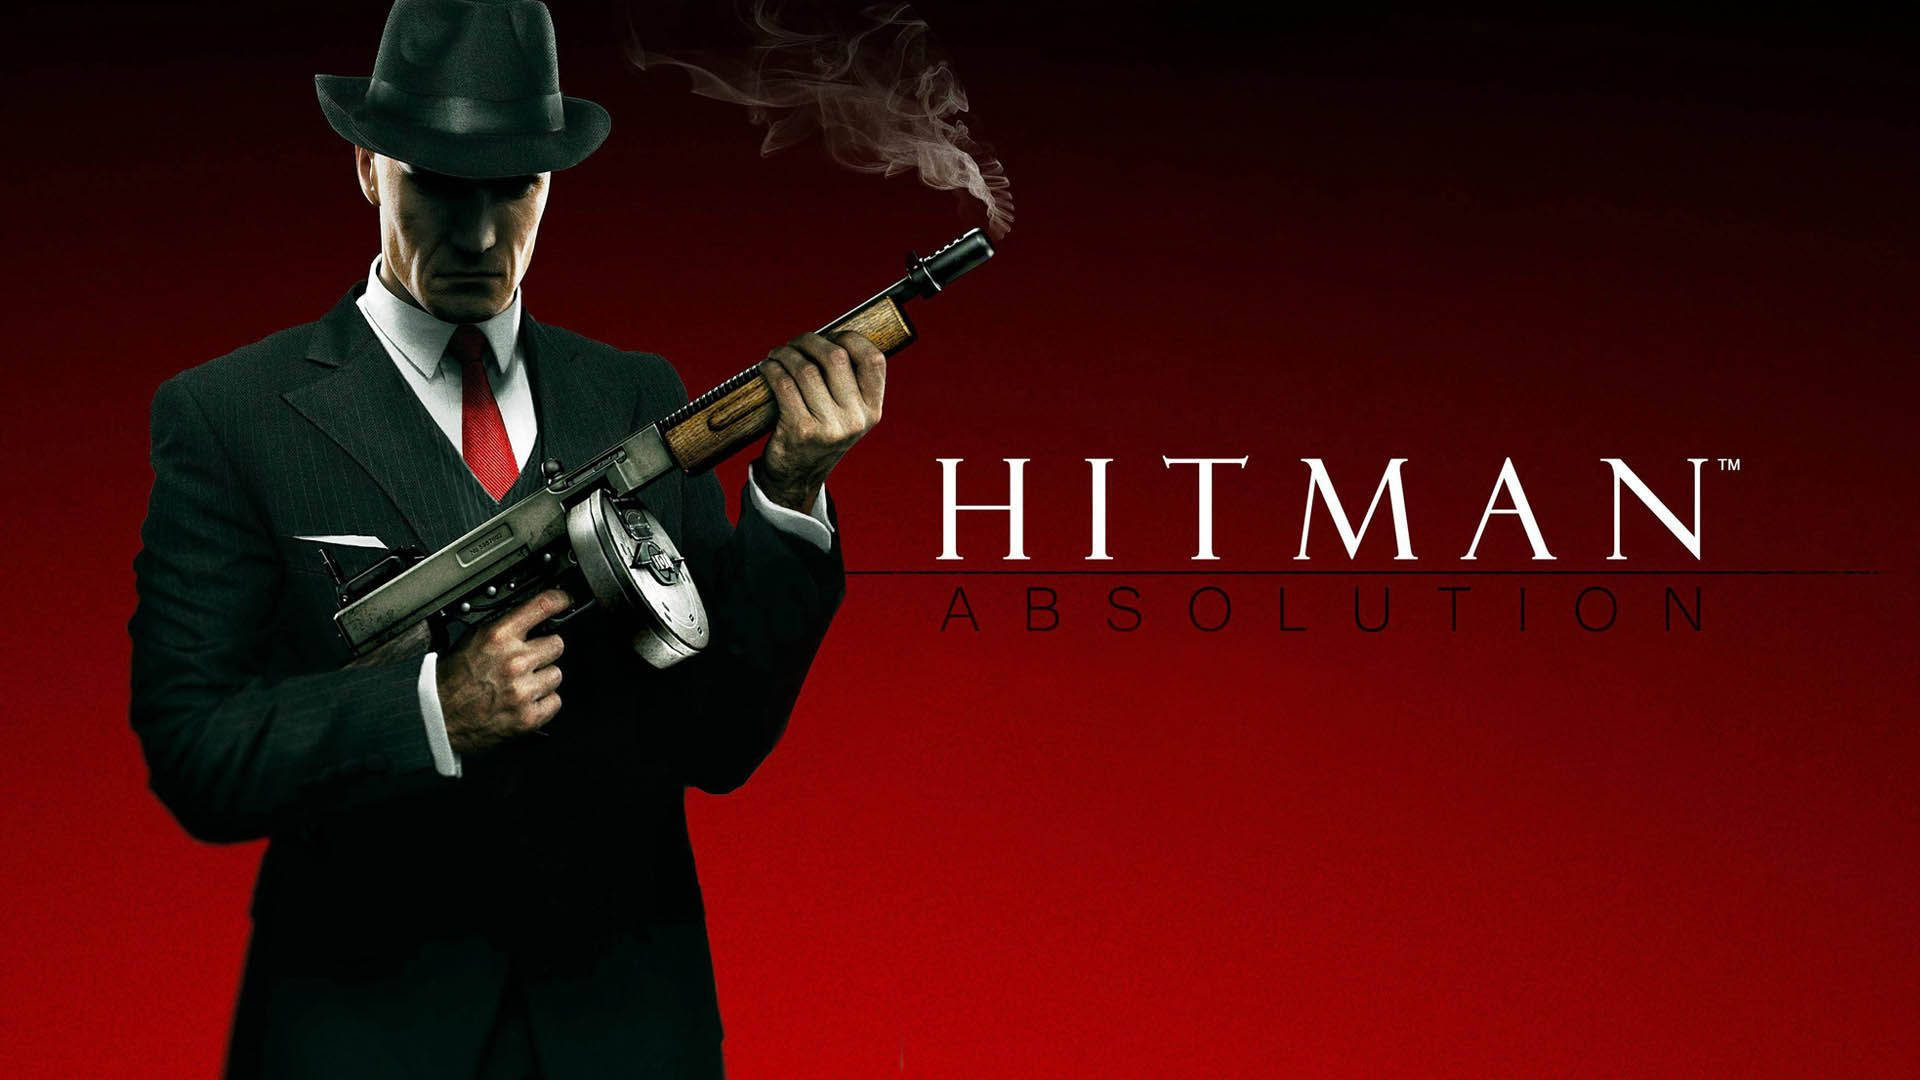 The Video Game Hitman Absolution Wallpaper